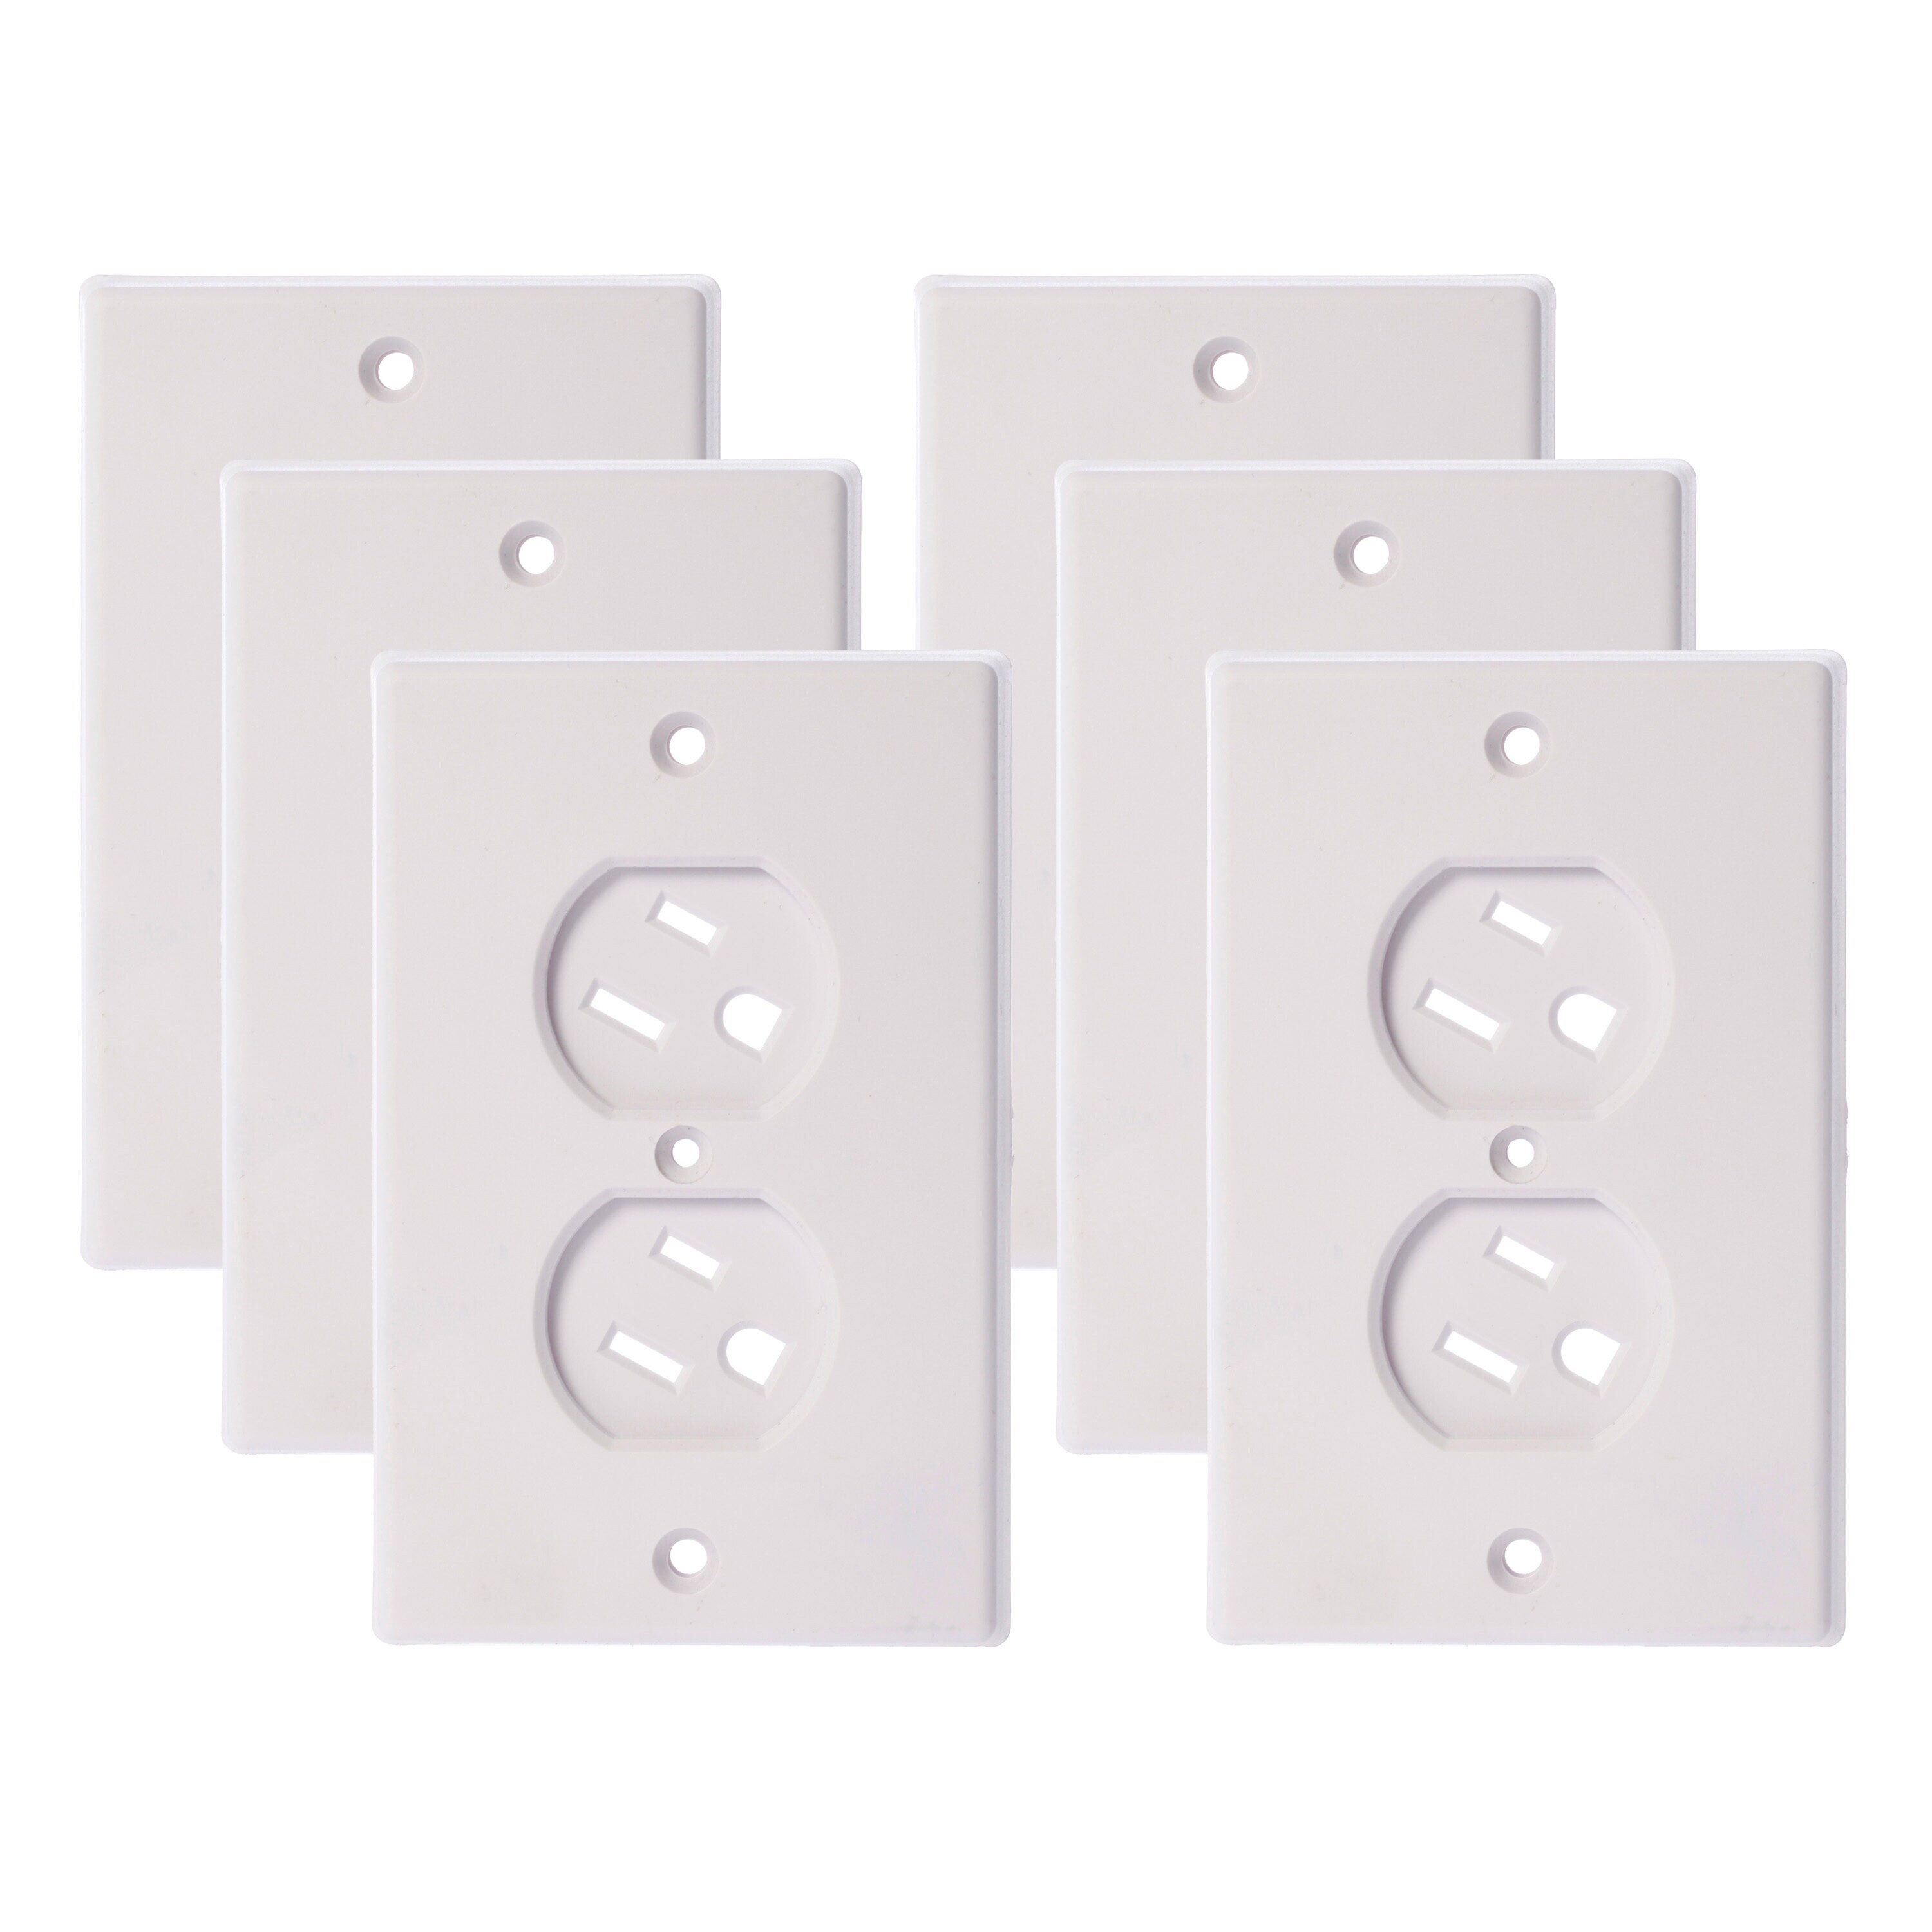 Dreambaby Child Safety White Outlet Covers 2-Pack at